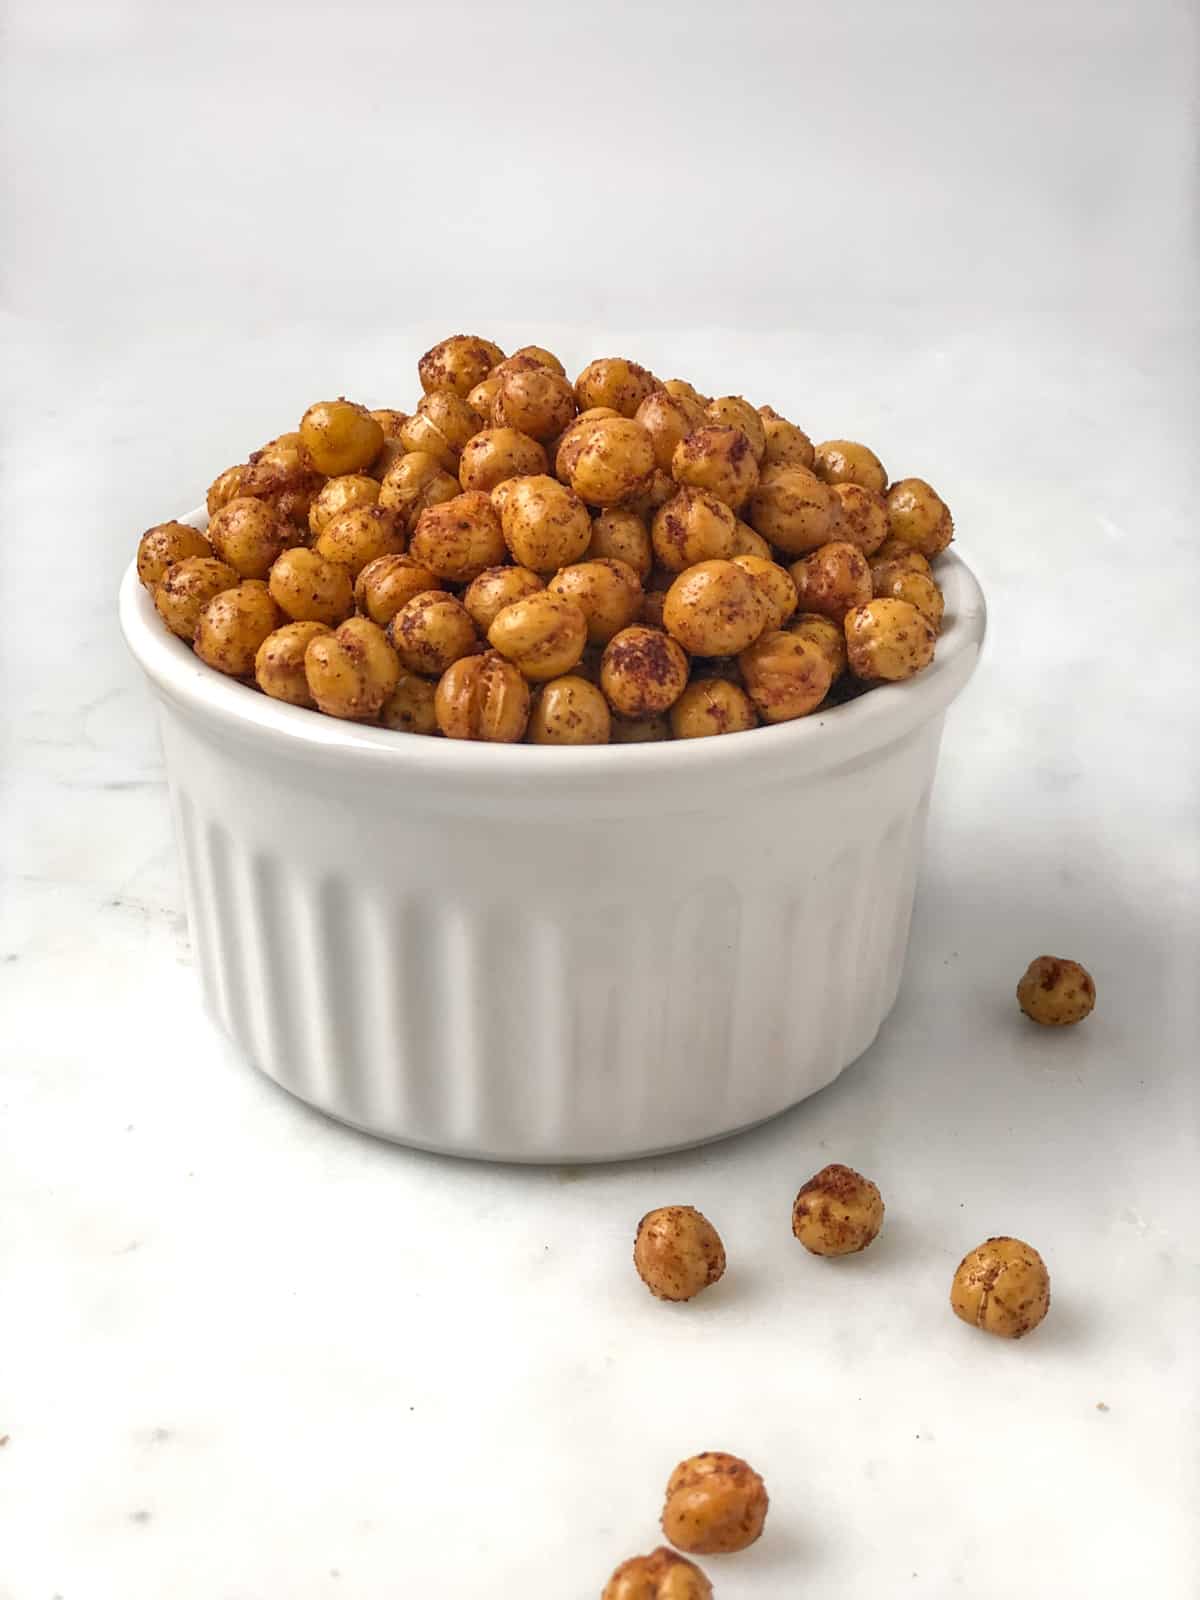 Crisp seasoned chickpeas piled up in a dish.